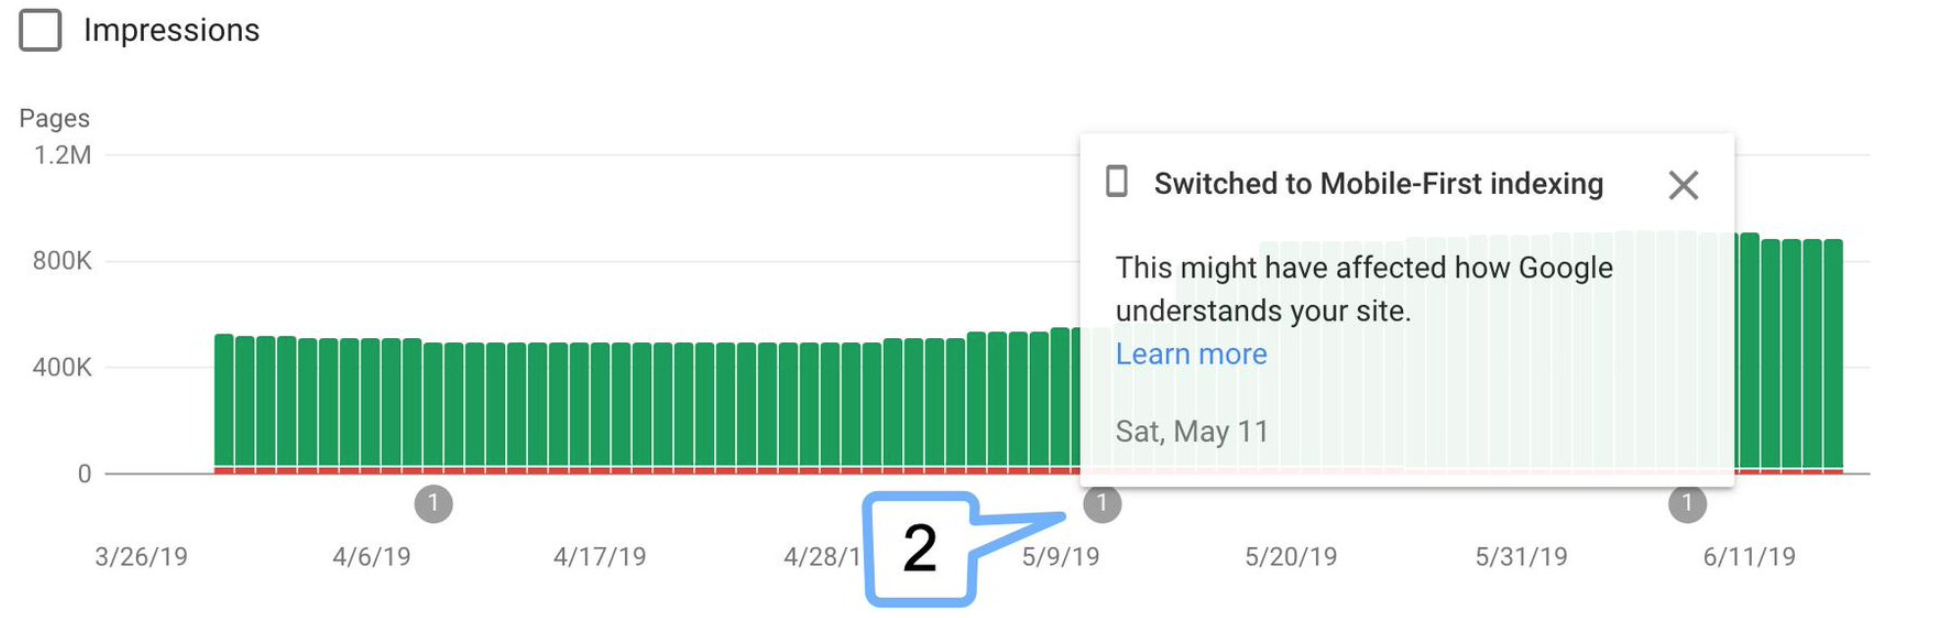 Google Search Console Offers Three New Sets of Googlebot Crawling Data